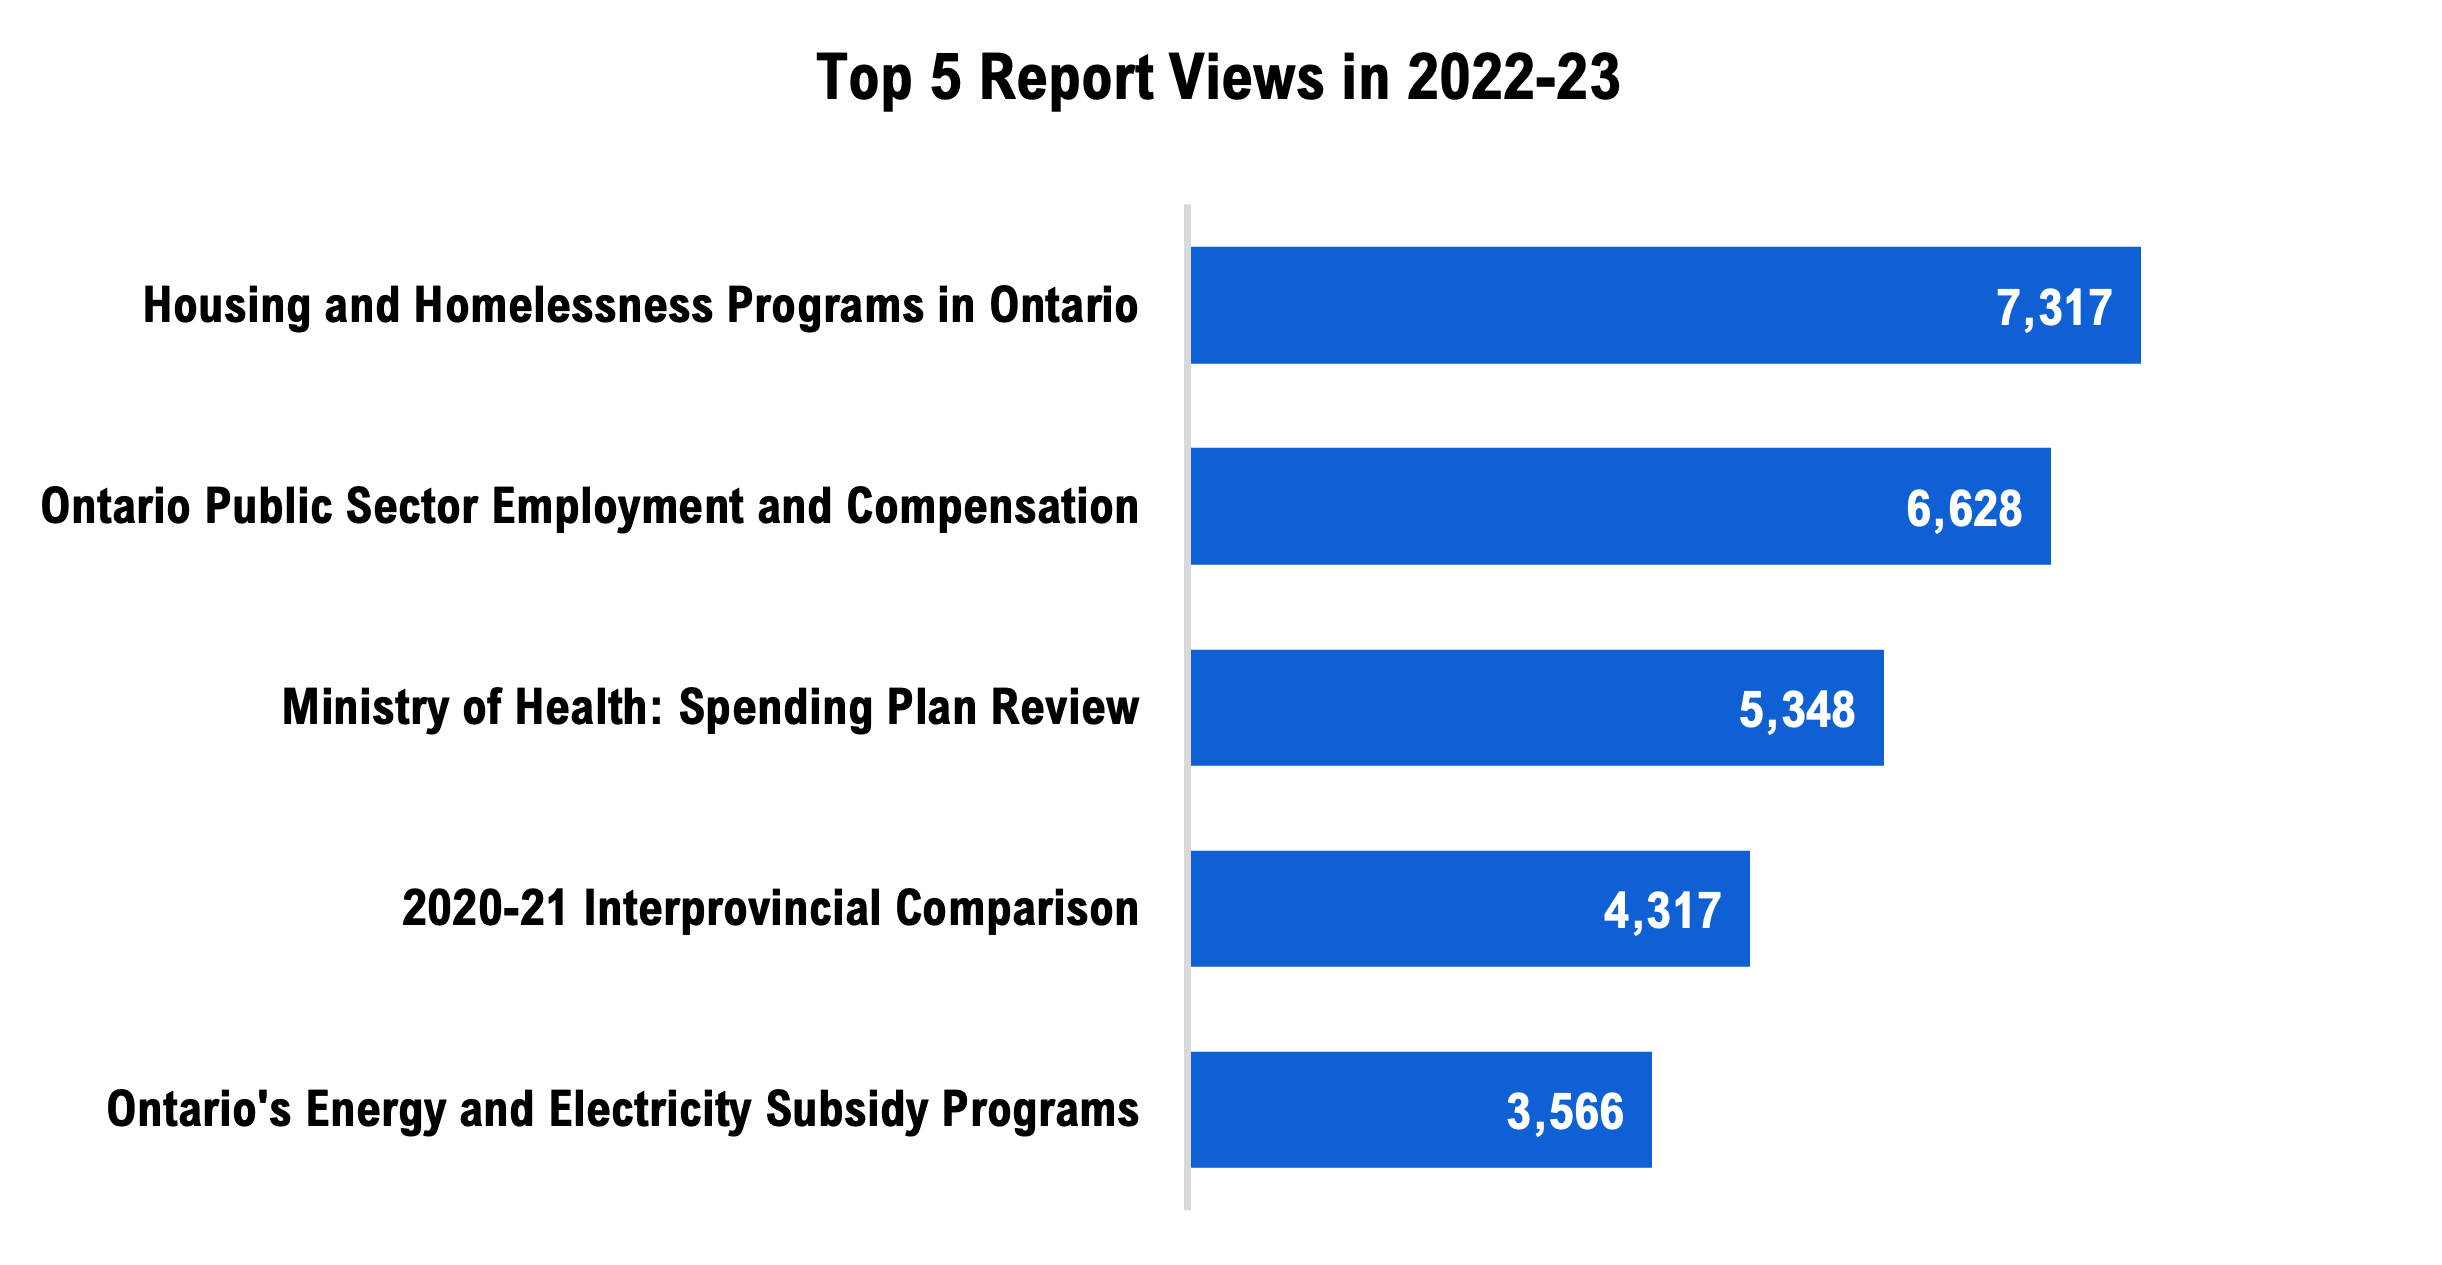 The FAO’s most popular report in 2022-23 was a review of Housing and Homelessness Programs in Ontario. While originally published in 2021, the report continued to draw attention with 7,317 views this year. Rounding out the top five most viewed reports in 2022-23 were Ontario Public Sector Employment and Compensation (2022), the Ministry of Health: Spending Plan Review (2021), 2020-21 Interprovincial Comparison (2022), and Ontario's Energy and Electricity Subsidy Programs (2022).